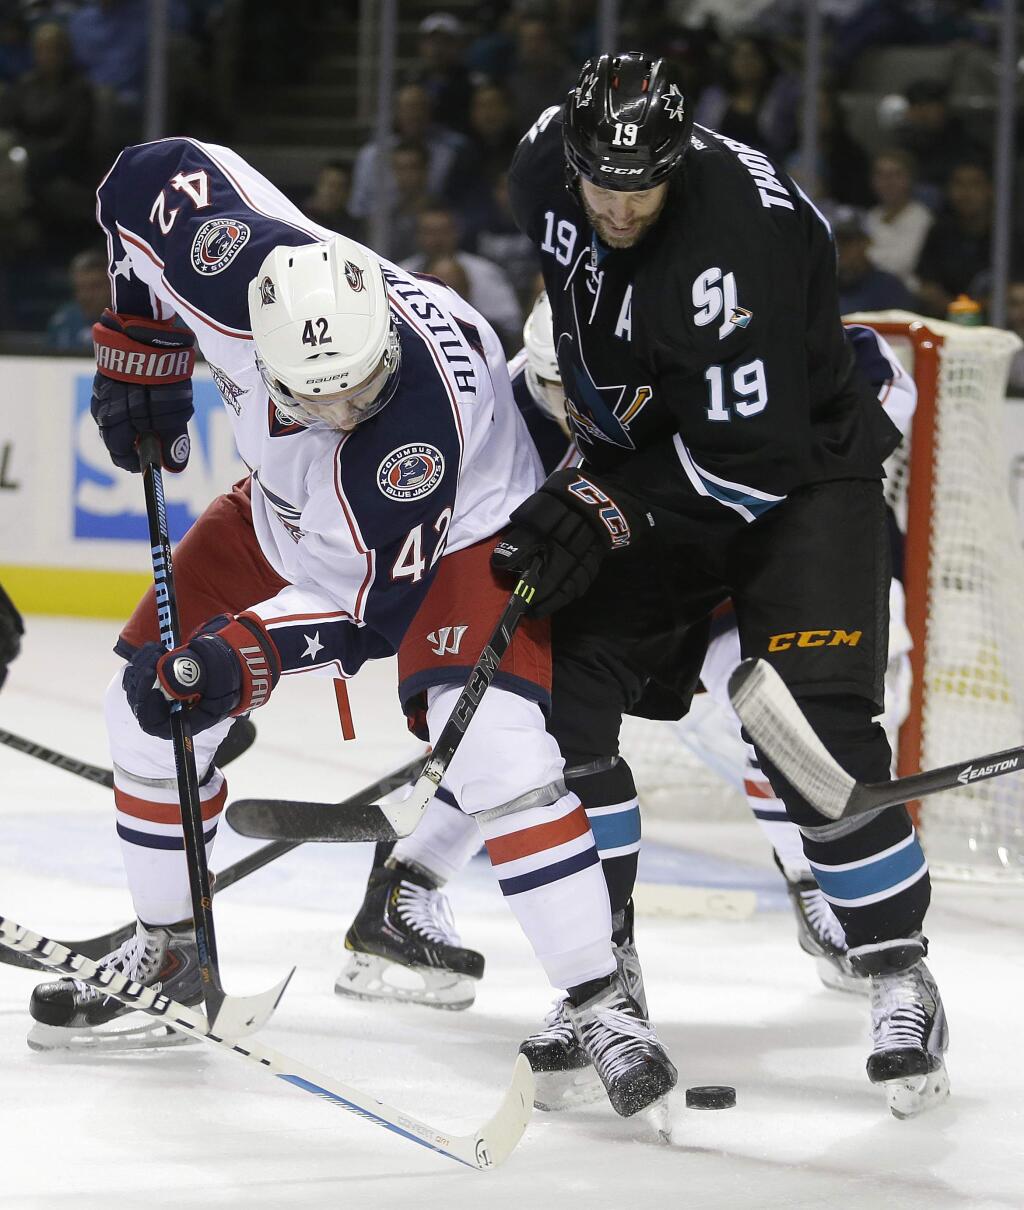 Columbus Blue Jackets' Artem Anisimov, left, and San Jose Sharks' Joe Thornton vie for the puck during the first period of an NHL hockey game Thursday, Oct. 23, 2014, in San Jose. (AP Photo/Ben Margot)